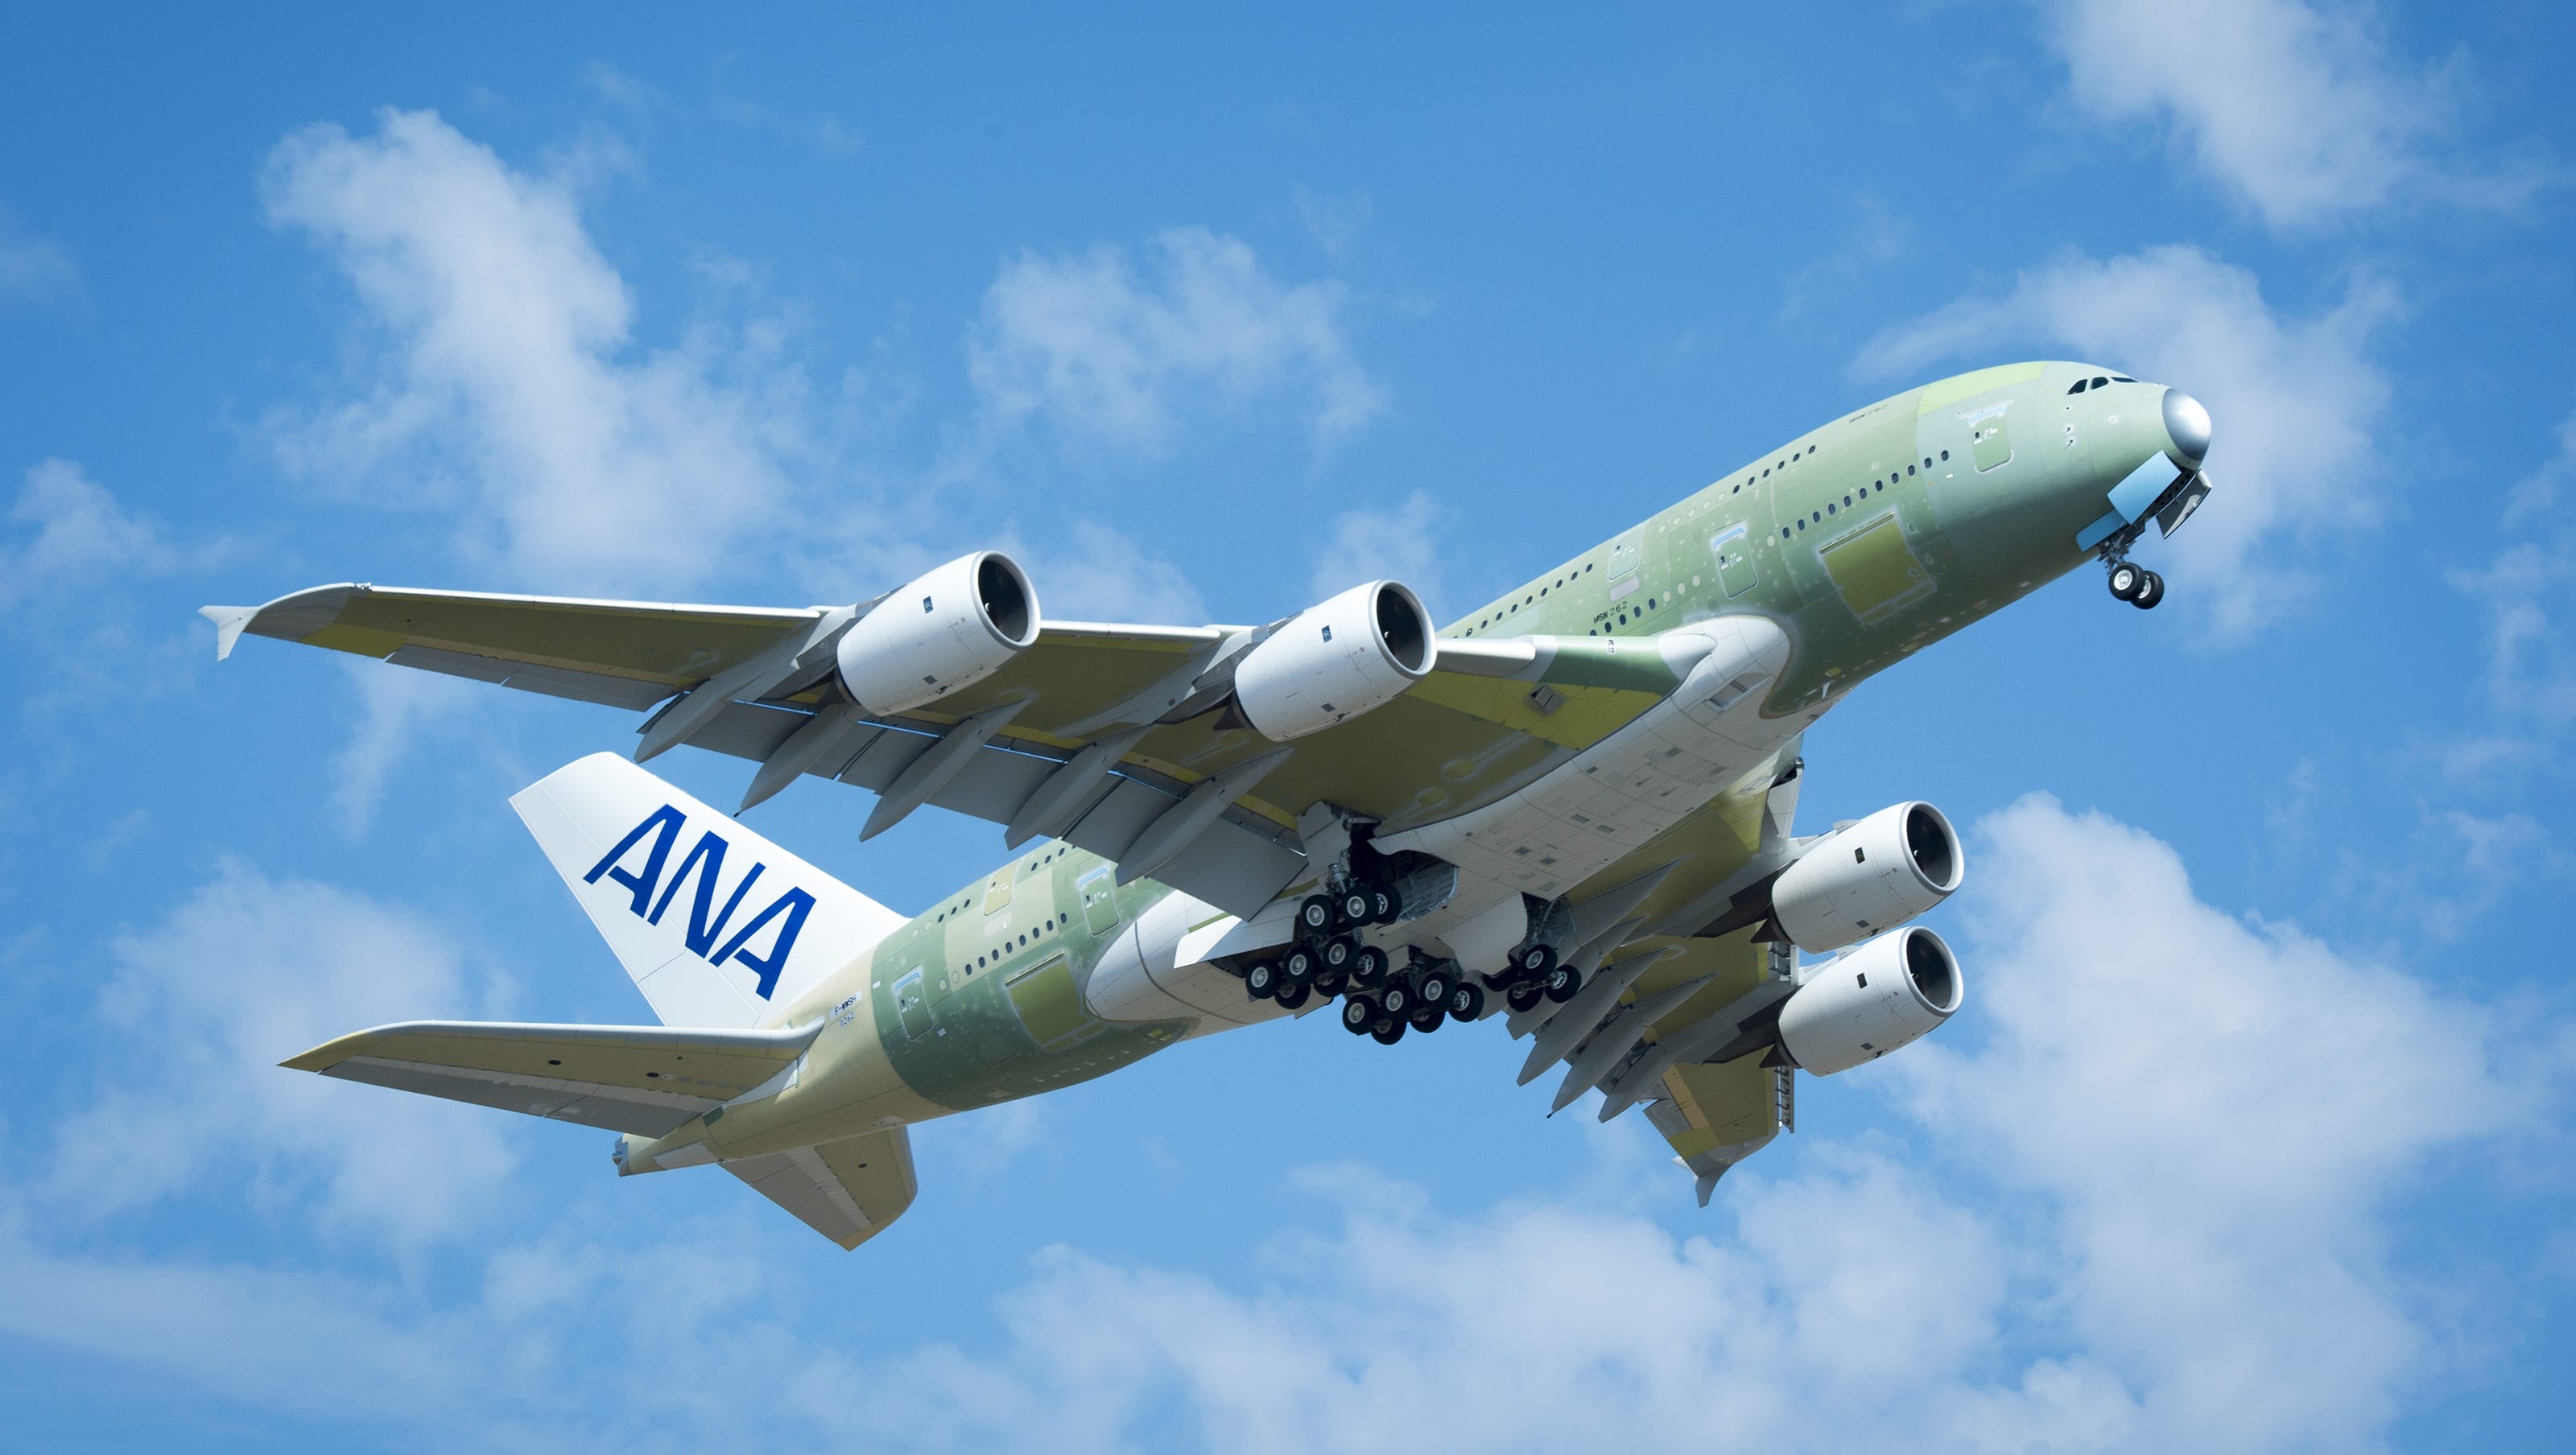 636728080093577921-First-ANA-A380-take-off-1.jpg?width=3200&height=1808&fit=crop&format=pjpg&auto=webp